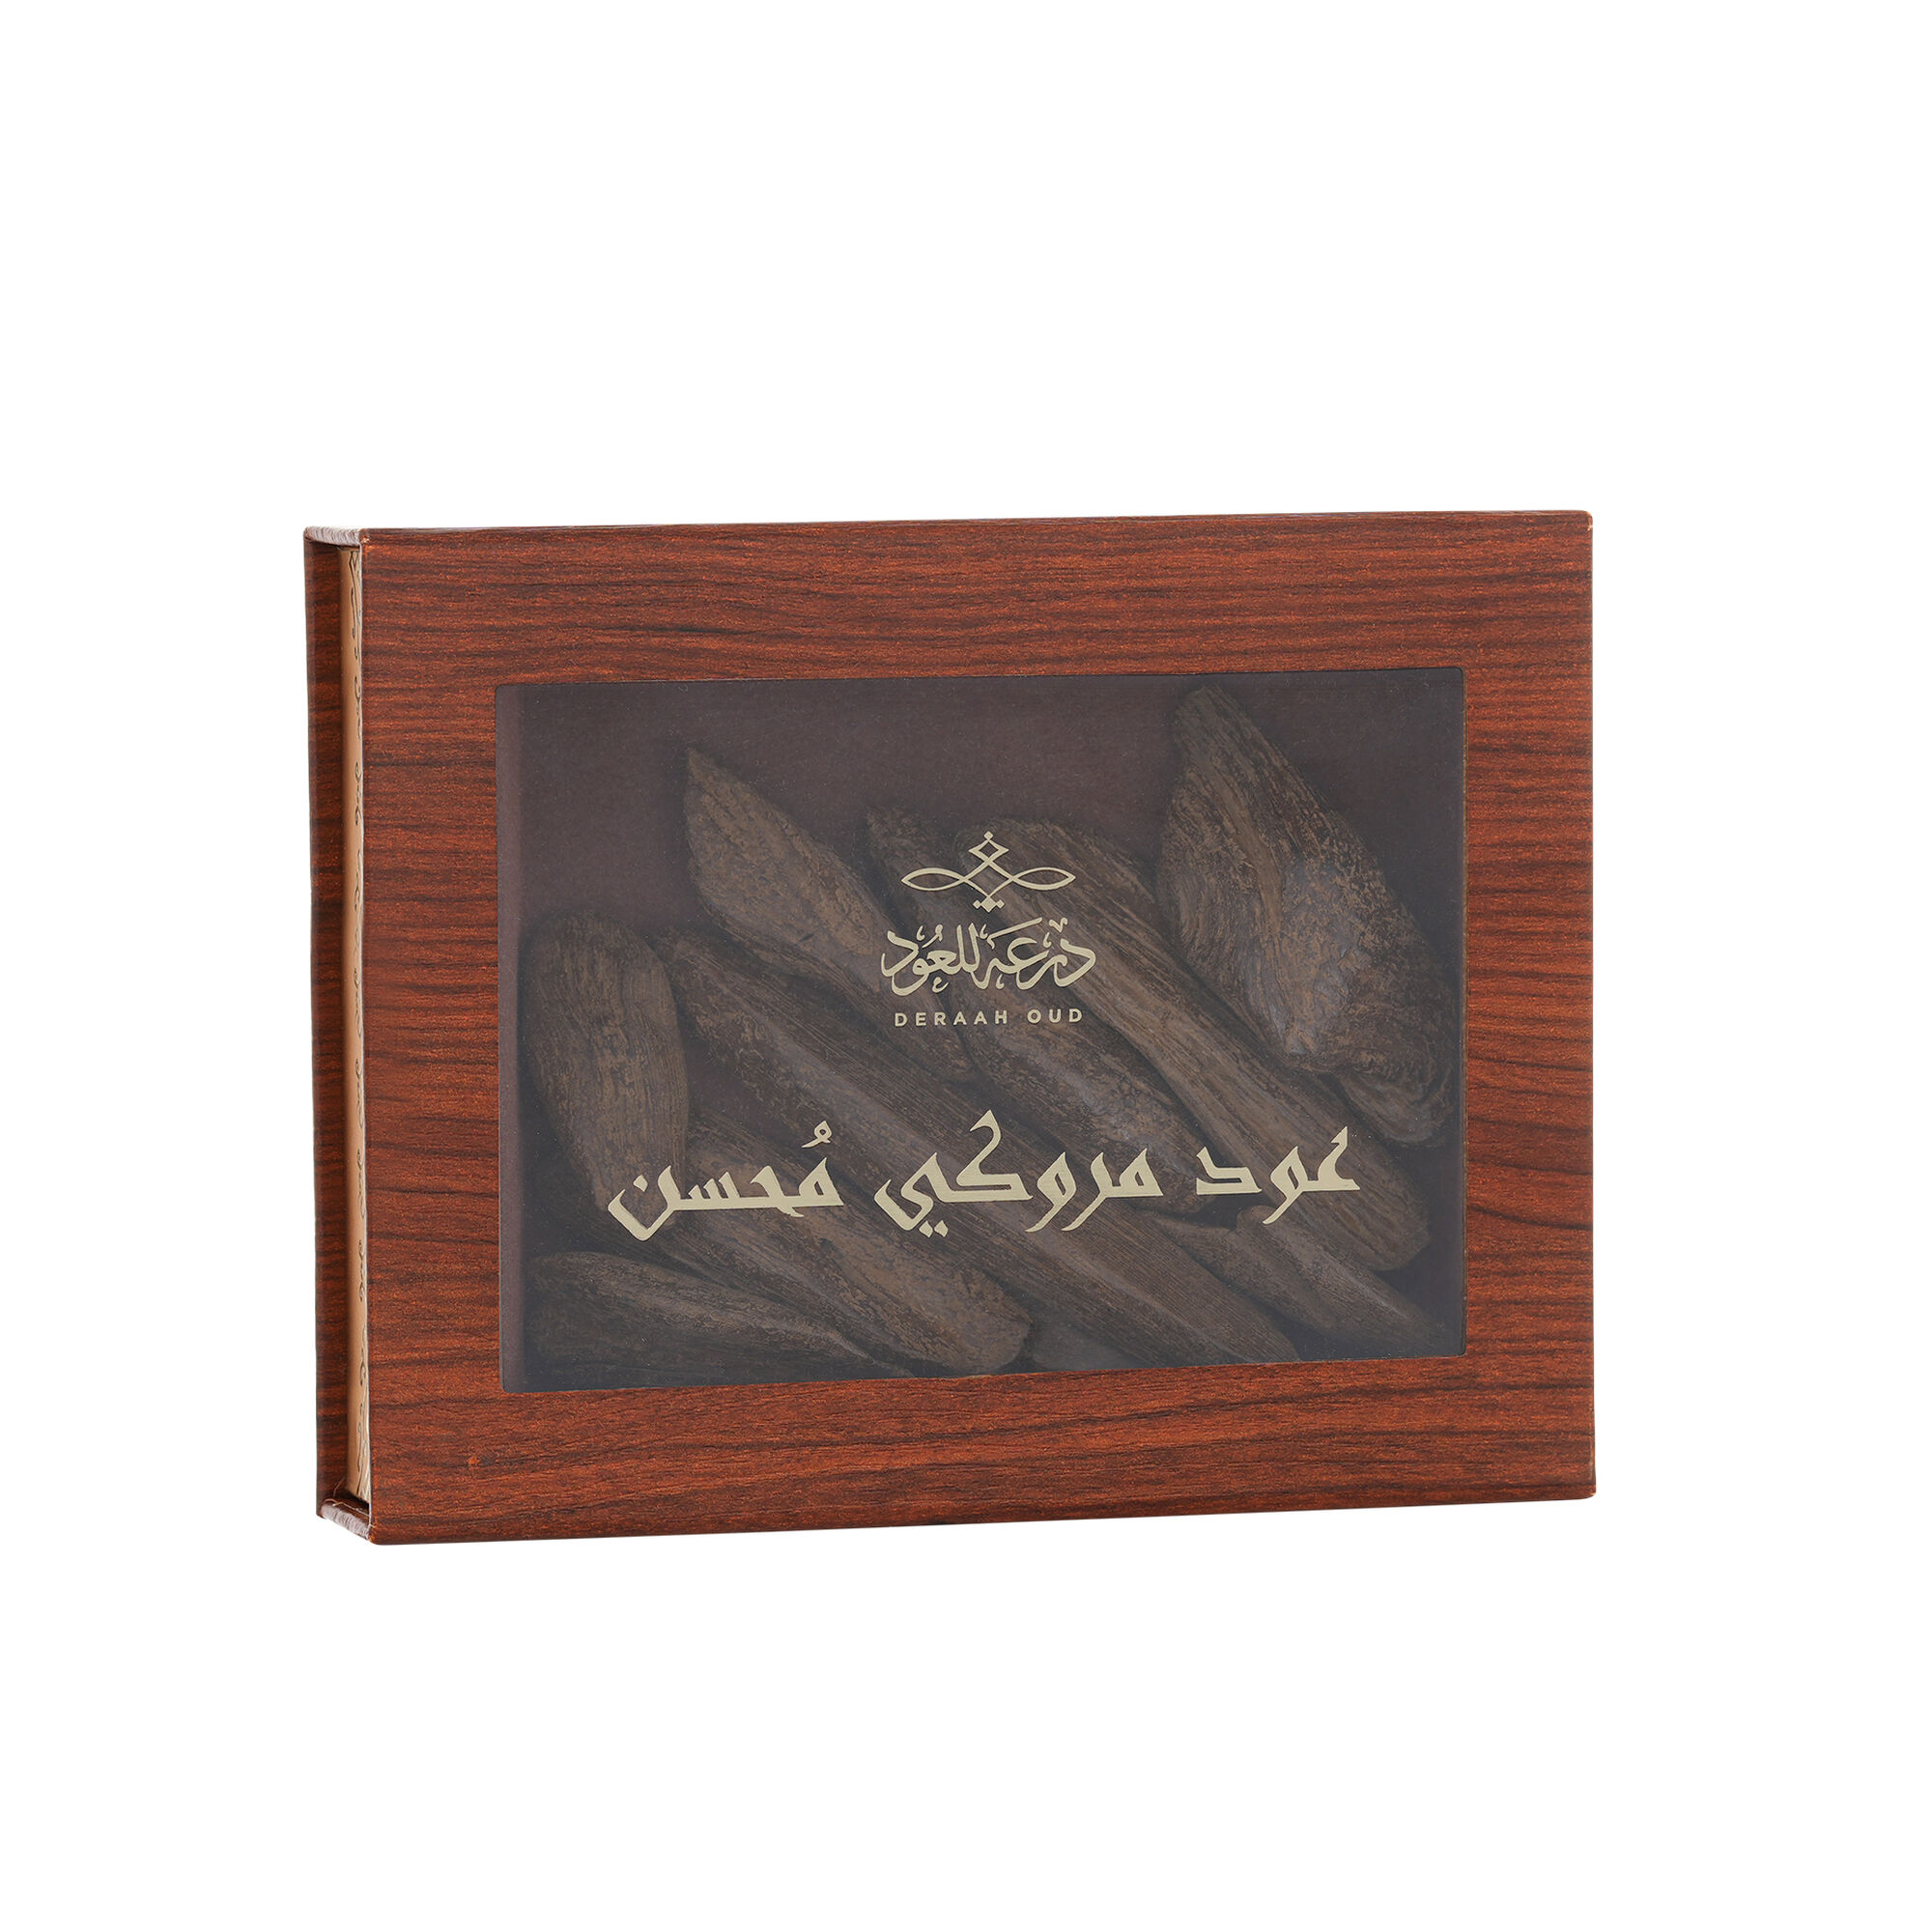 Super double upgraded Moroccan oud packet